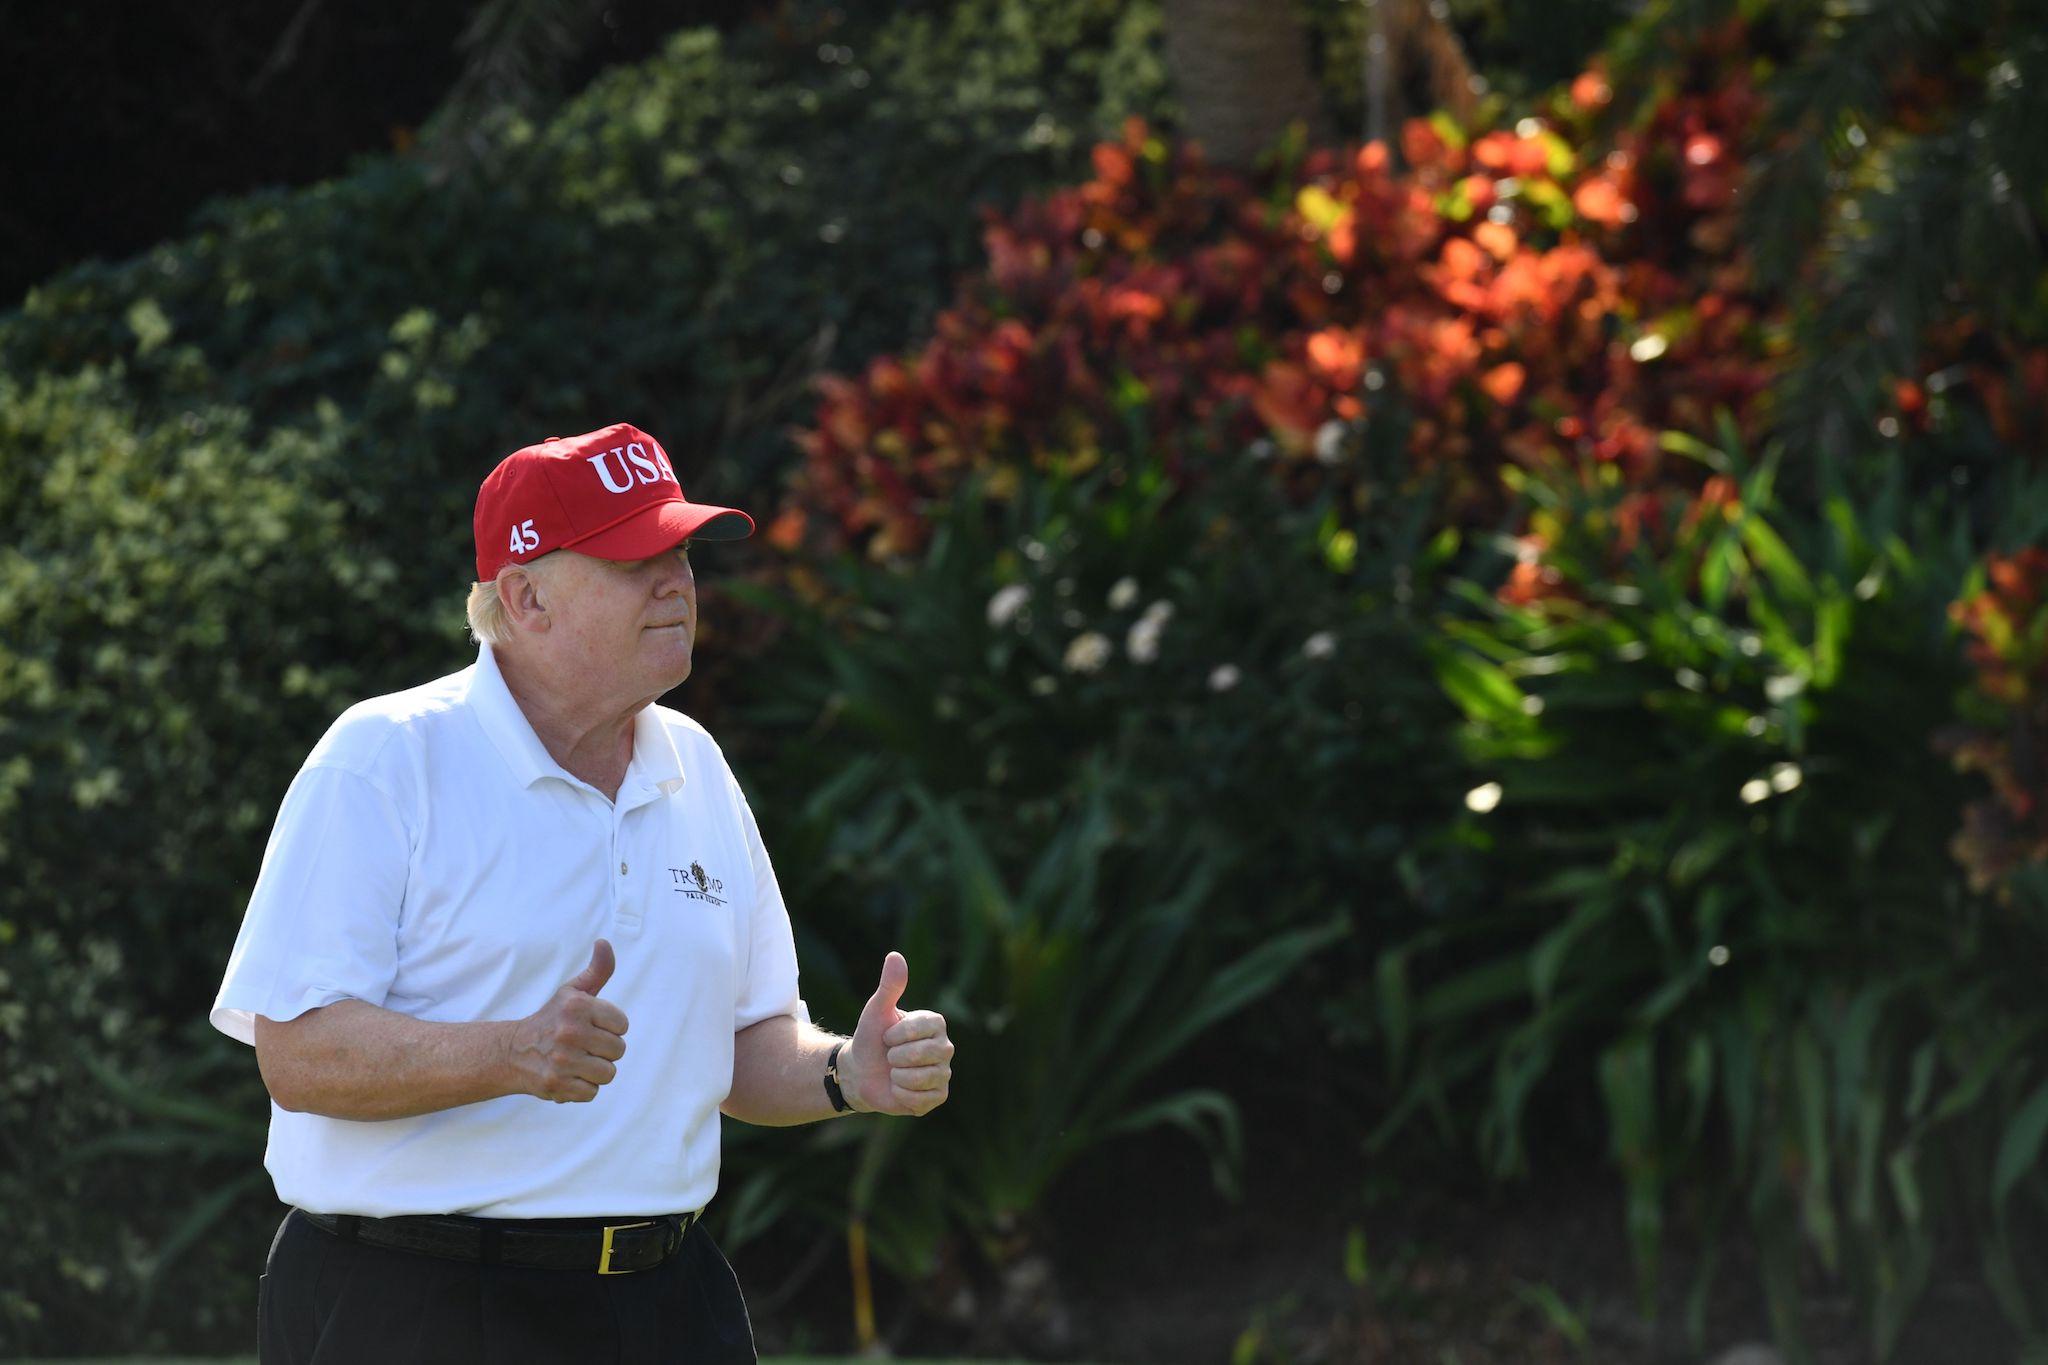 US President Donald Trump holds two thumbs up while meeting with service members of the United States Coast Guard to play golf at Trump International Golf Course in Mar-a-Lago, Florida on December 29, 2017